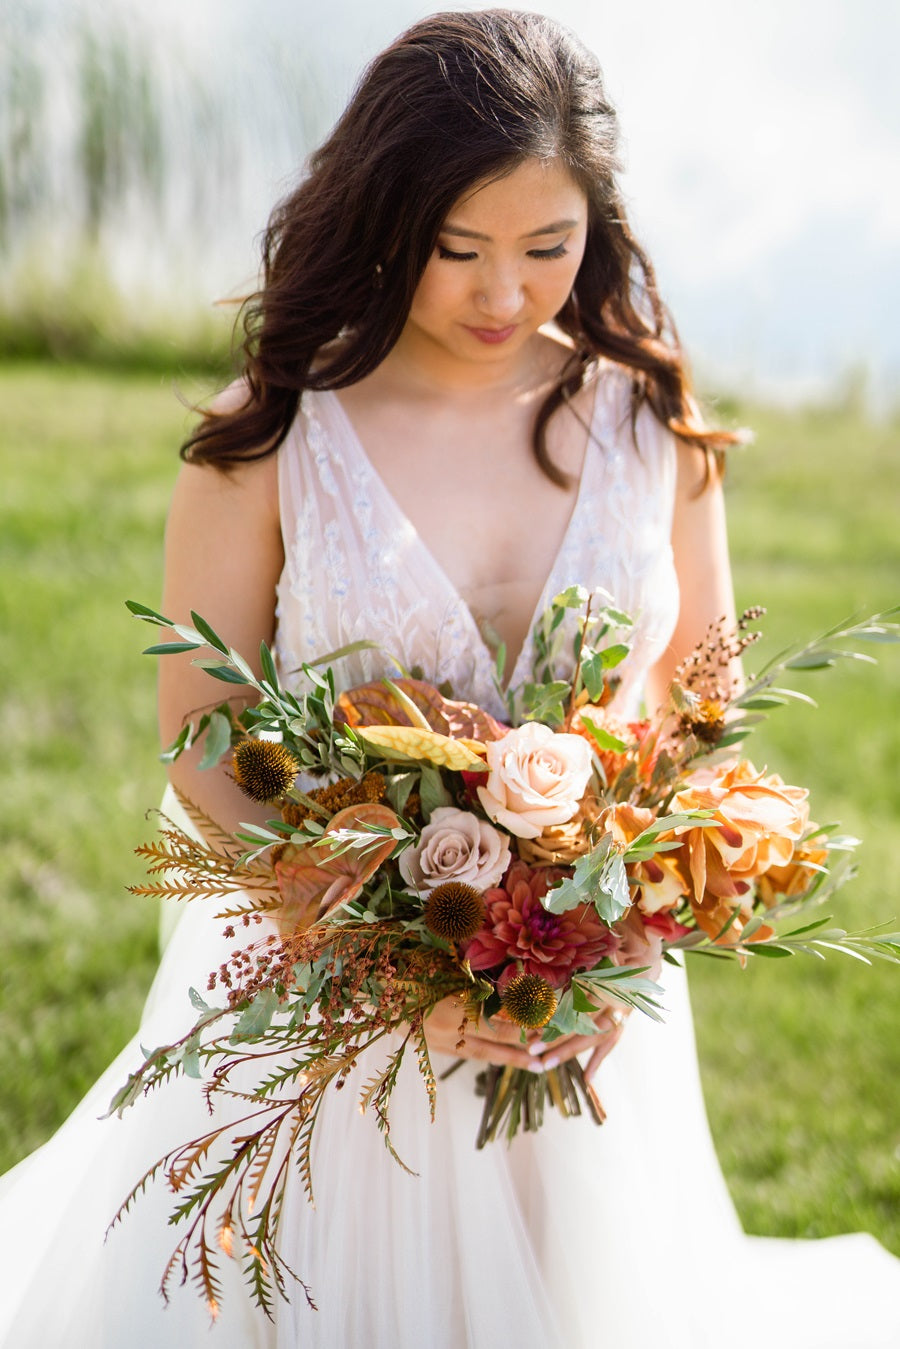 Bride holding bridal bouquet, fall colors, aesymmetric style, roses, dahlias, and orchids.